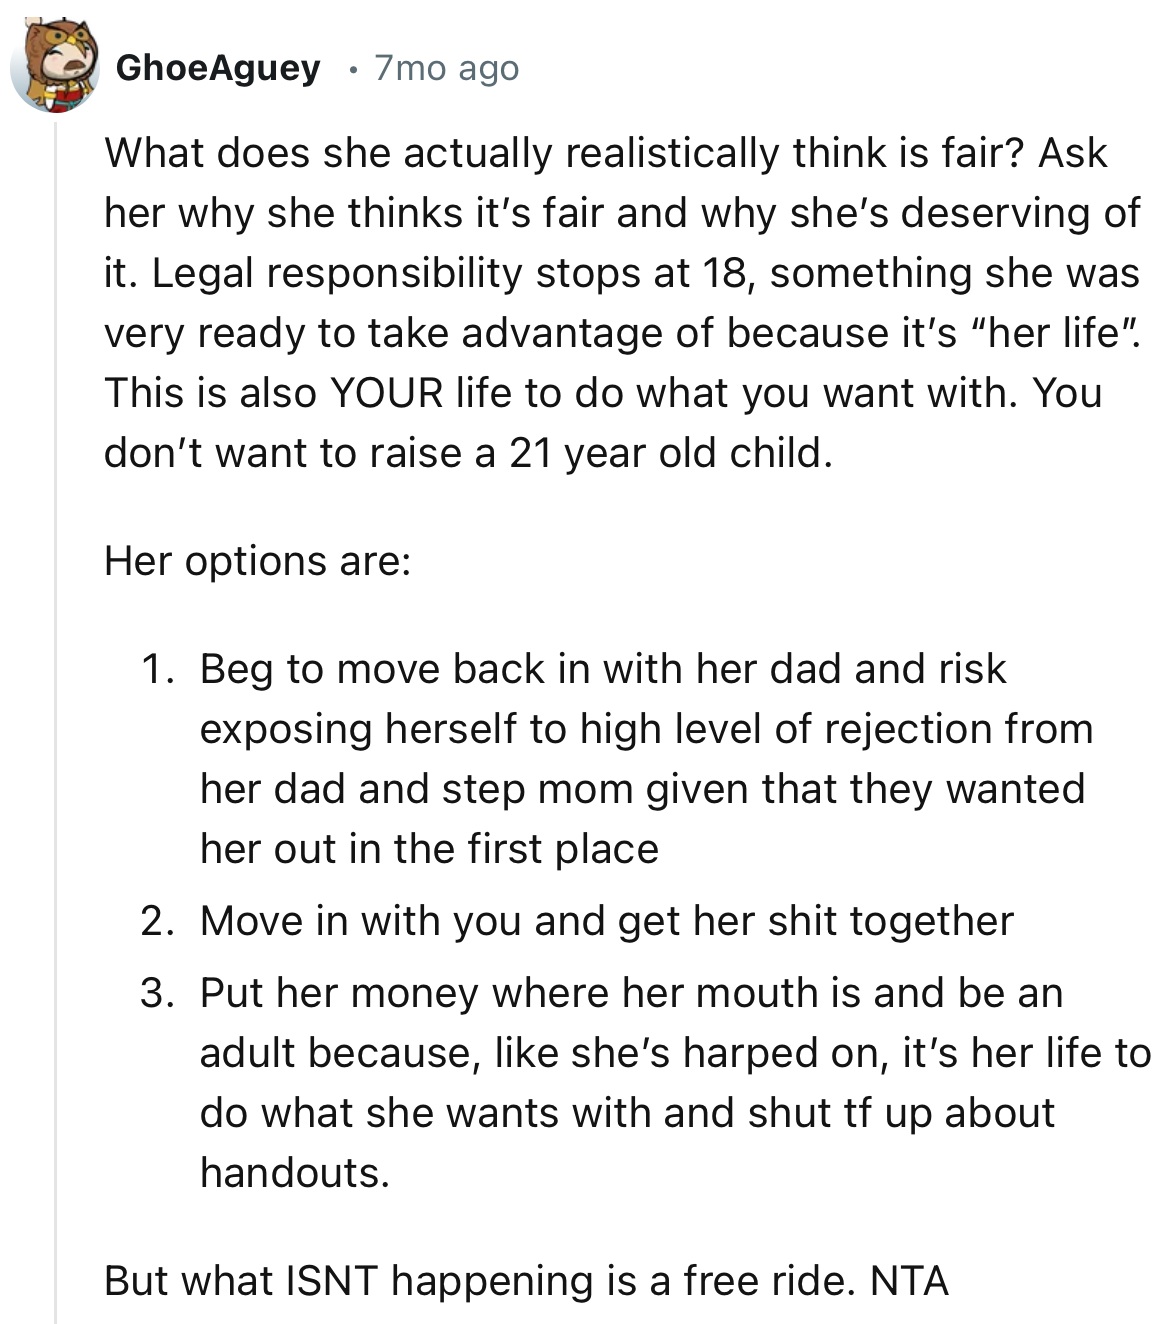 “Legal responsibility stops at 18, something she was very ready to take advantage of because it’s “her life”. This is also YOUR life to do what you want with.”